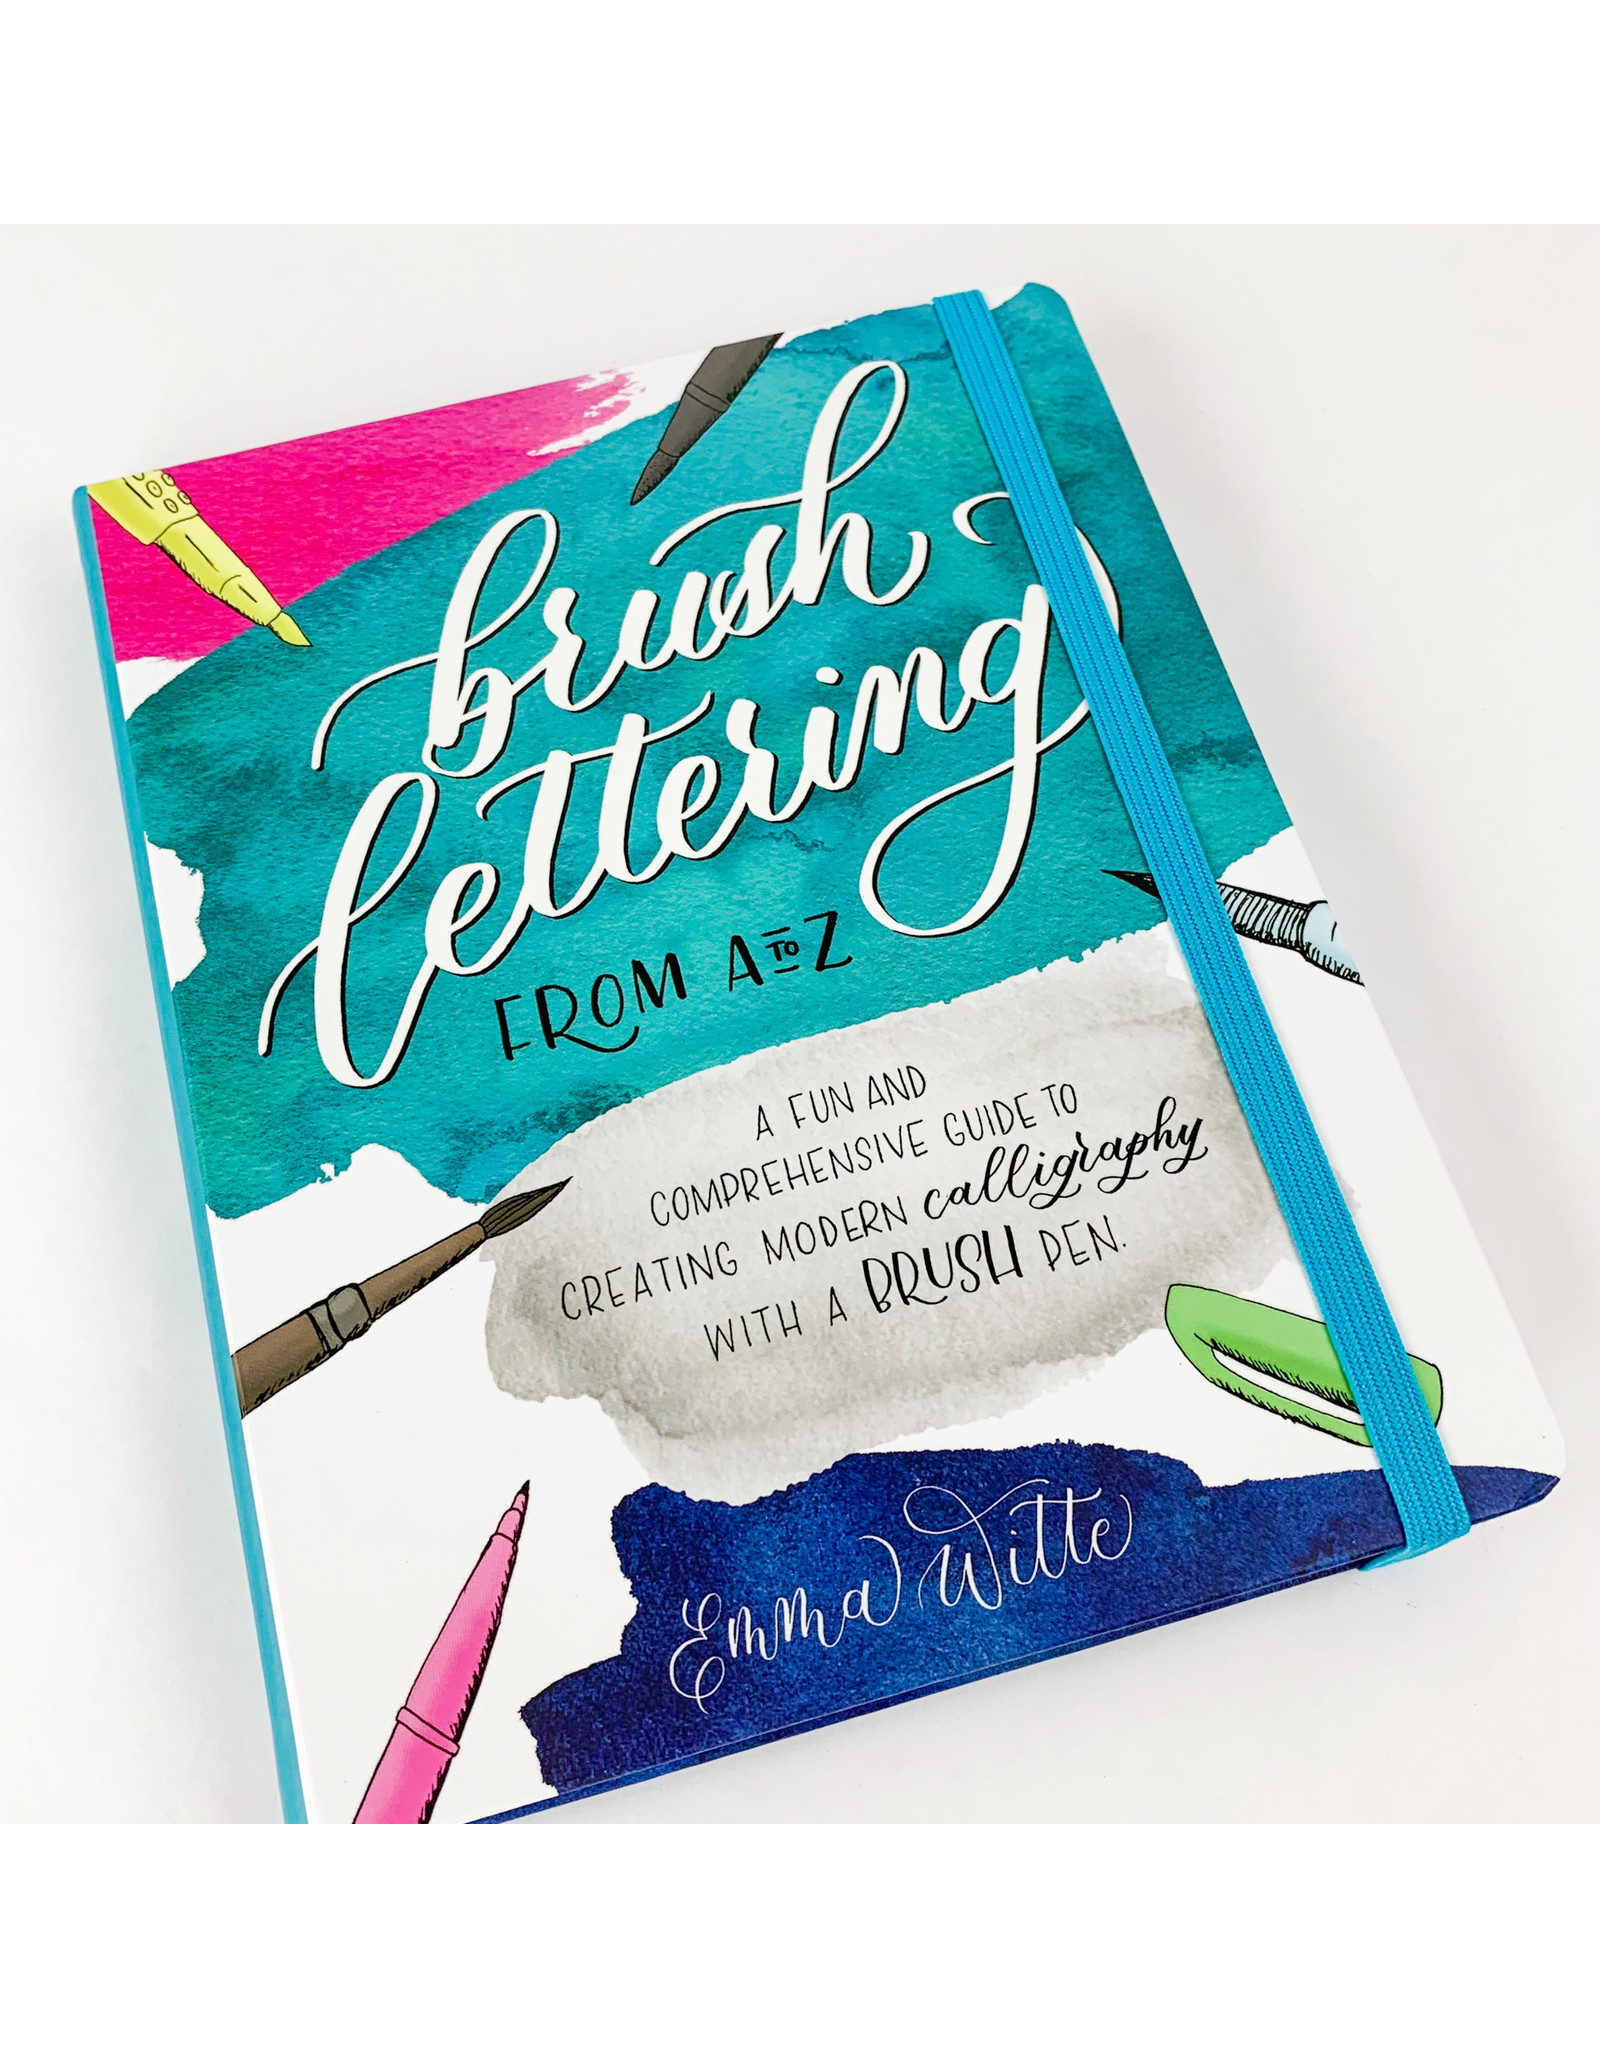 Brush Lettering from a to Z: A Fun and Comprehensive Guide to Creating Modern Calligraphy with a Brush Pen [Book]